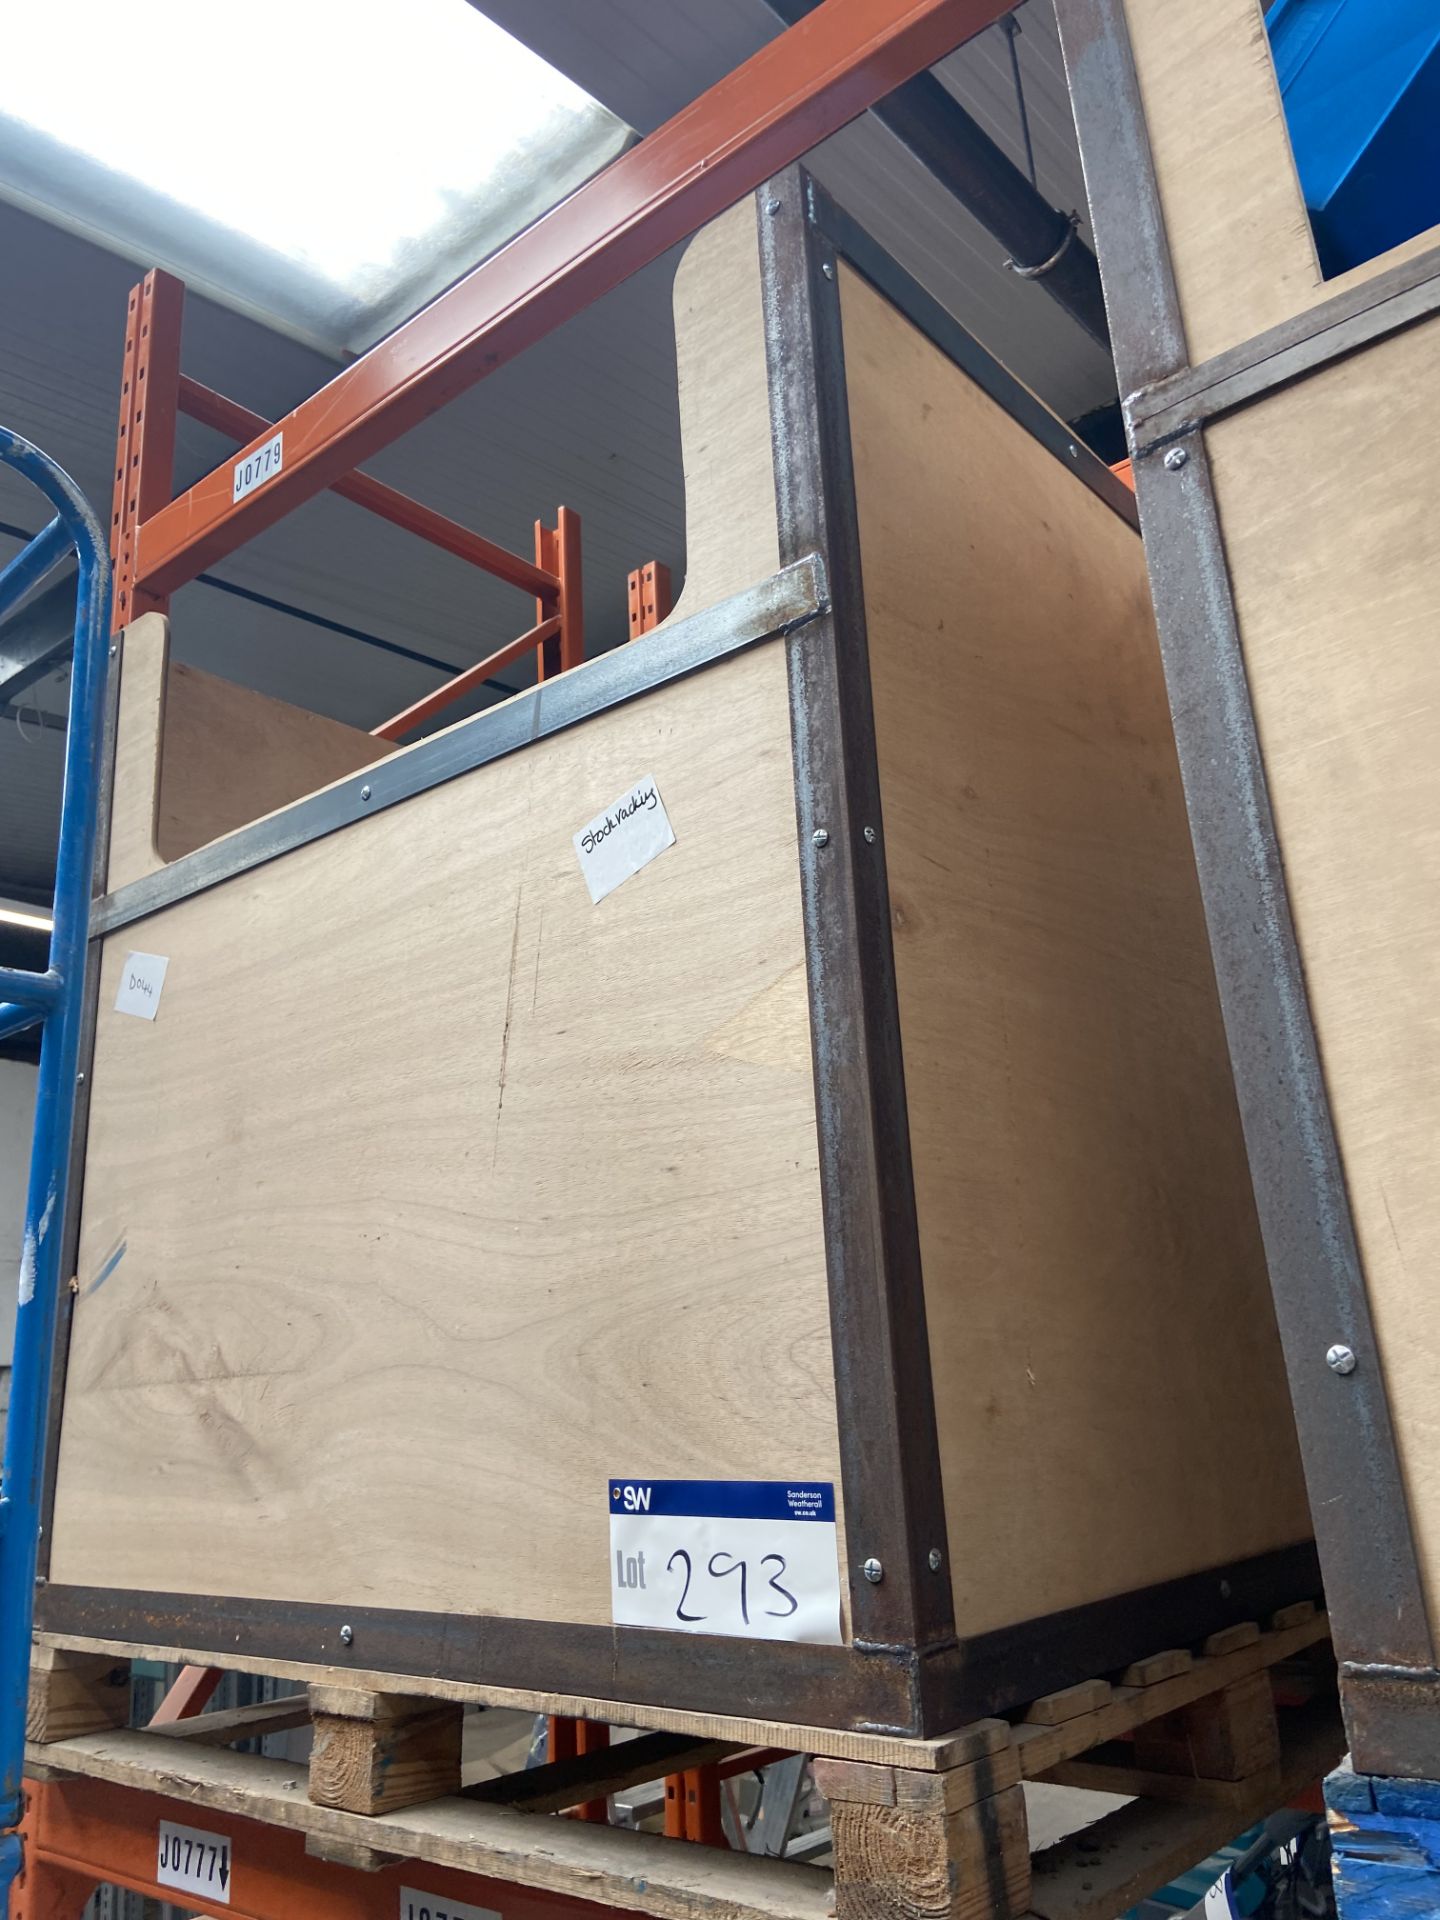 Steel Framed Product Box, with contents including shelving components, D044 (J0778), Lot located